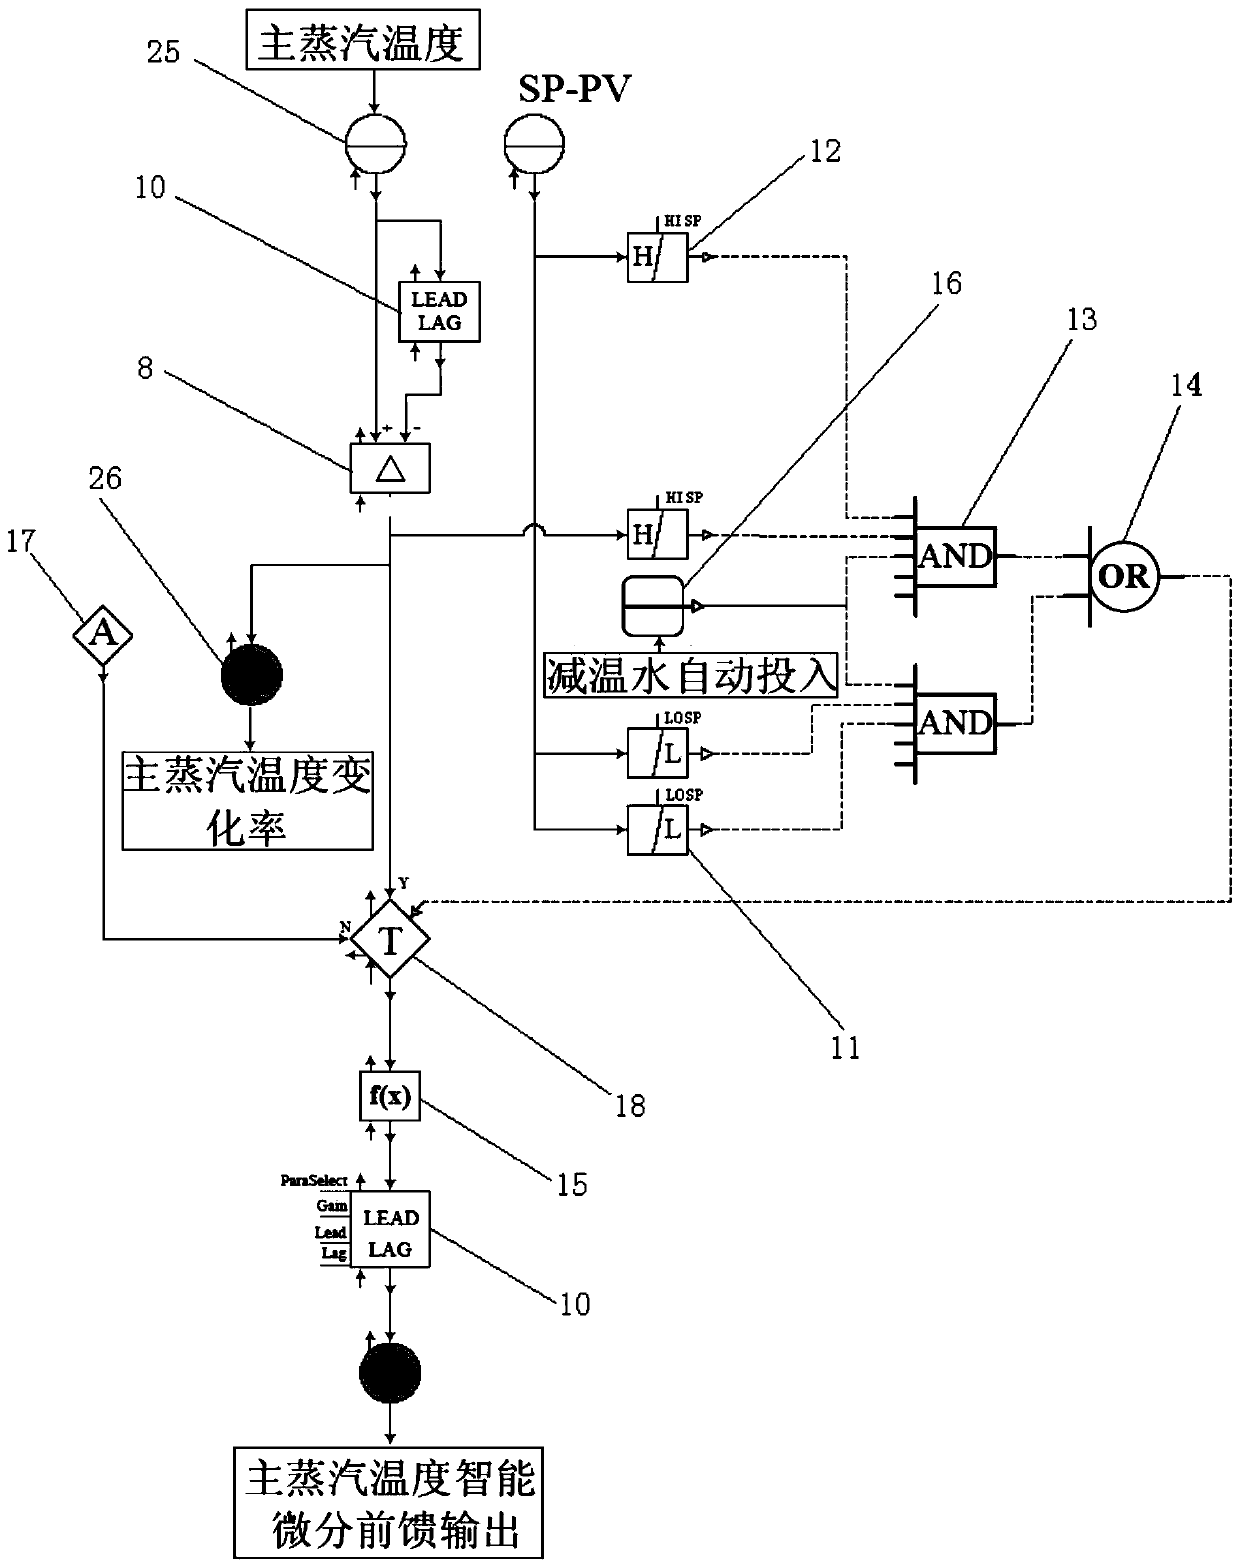 Boiler main steam temperature control method with frequent fluctuations in power grid agc load command